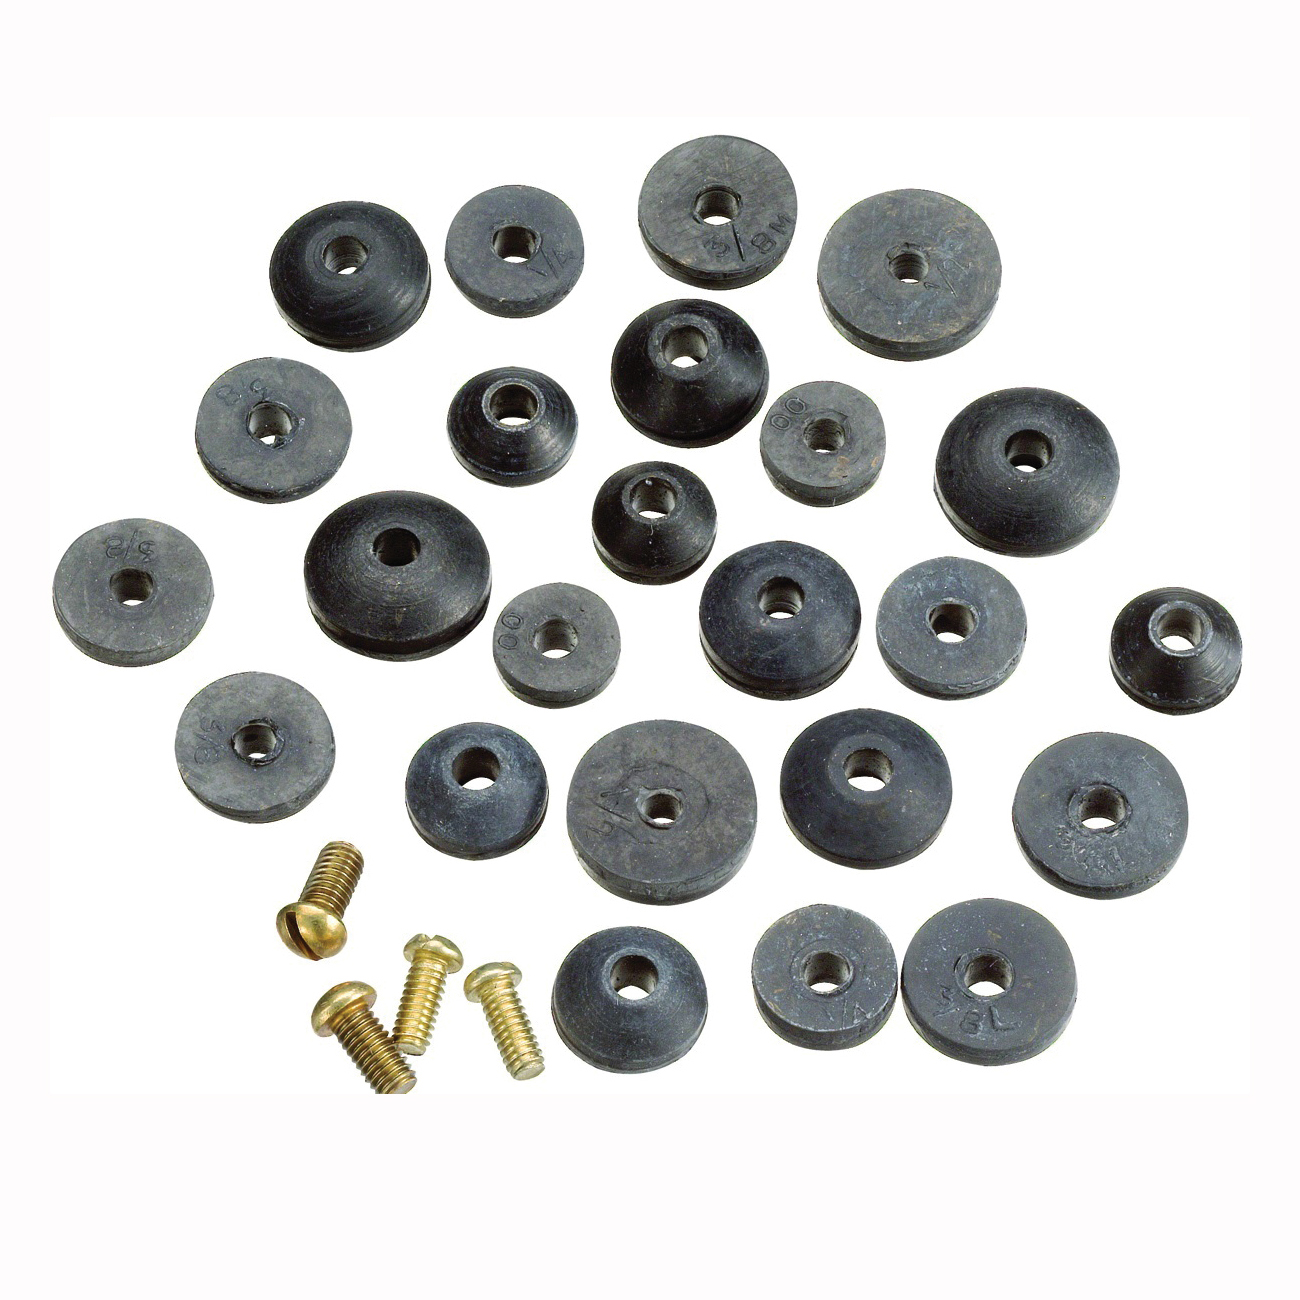 PP20521 Faucet Washer Assortment, Rubber, For: Sink and Faucets